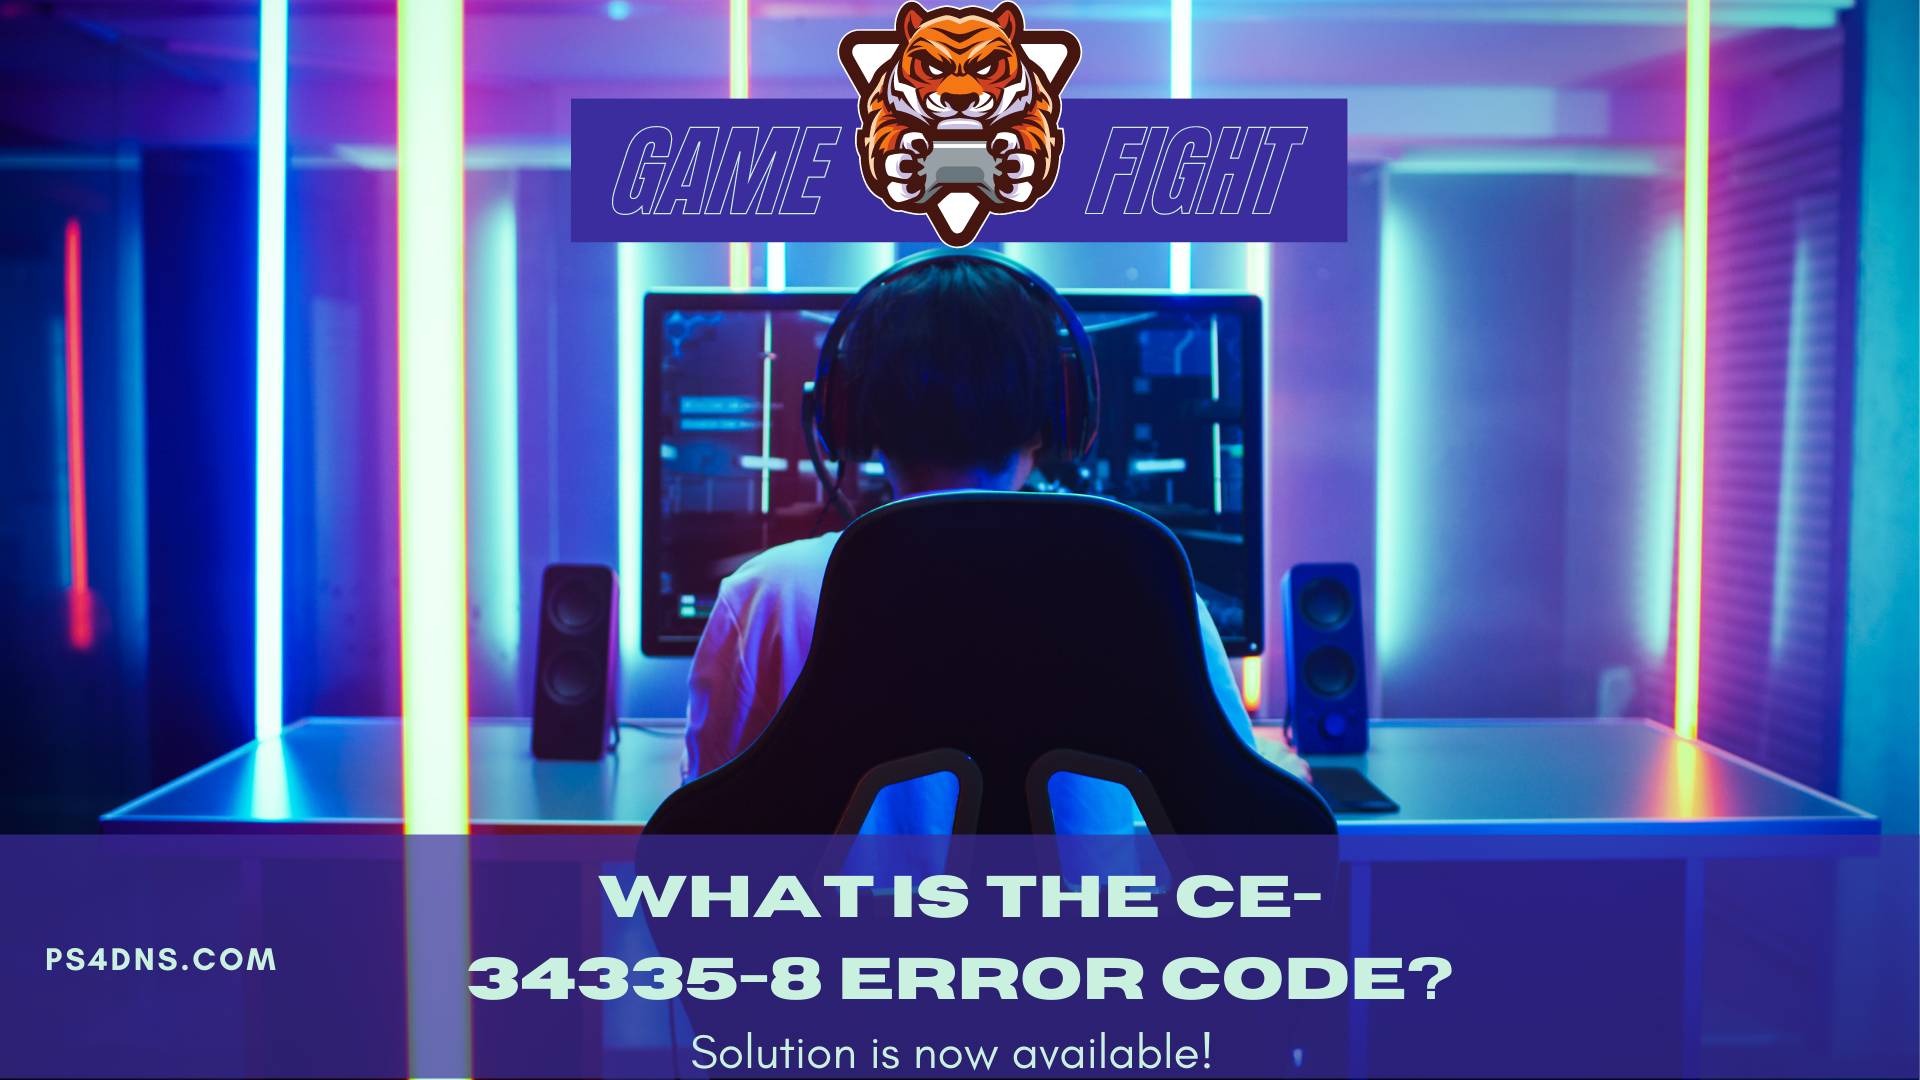 If you are still experiencing the CE-34335-8 PS4 error code even after trying the above solutions, you may need to contact PlayStation Support for further assistance. Here are the steps you can follow to get in touch with them: